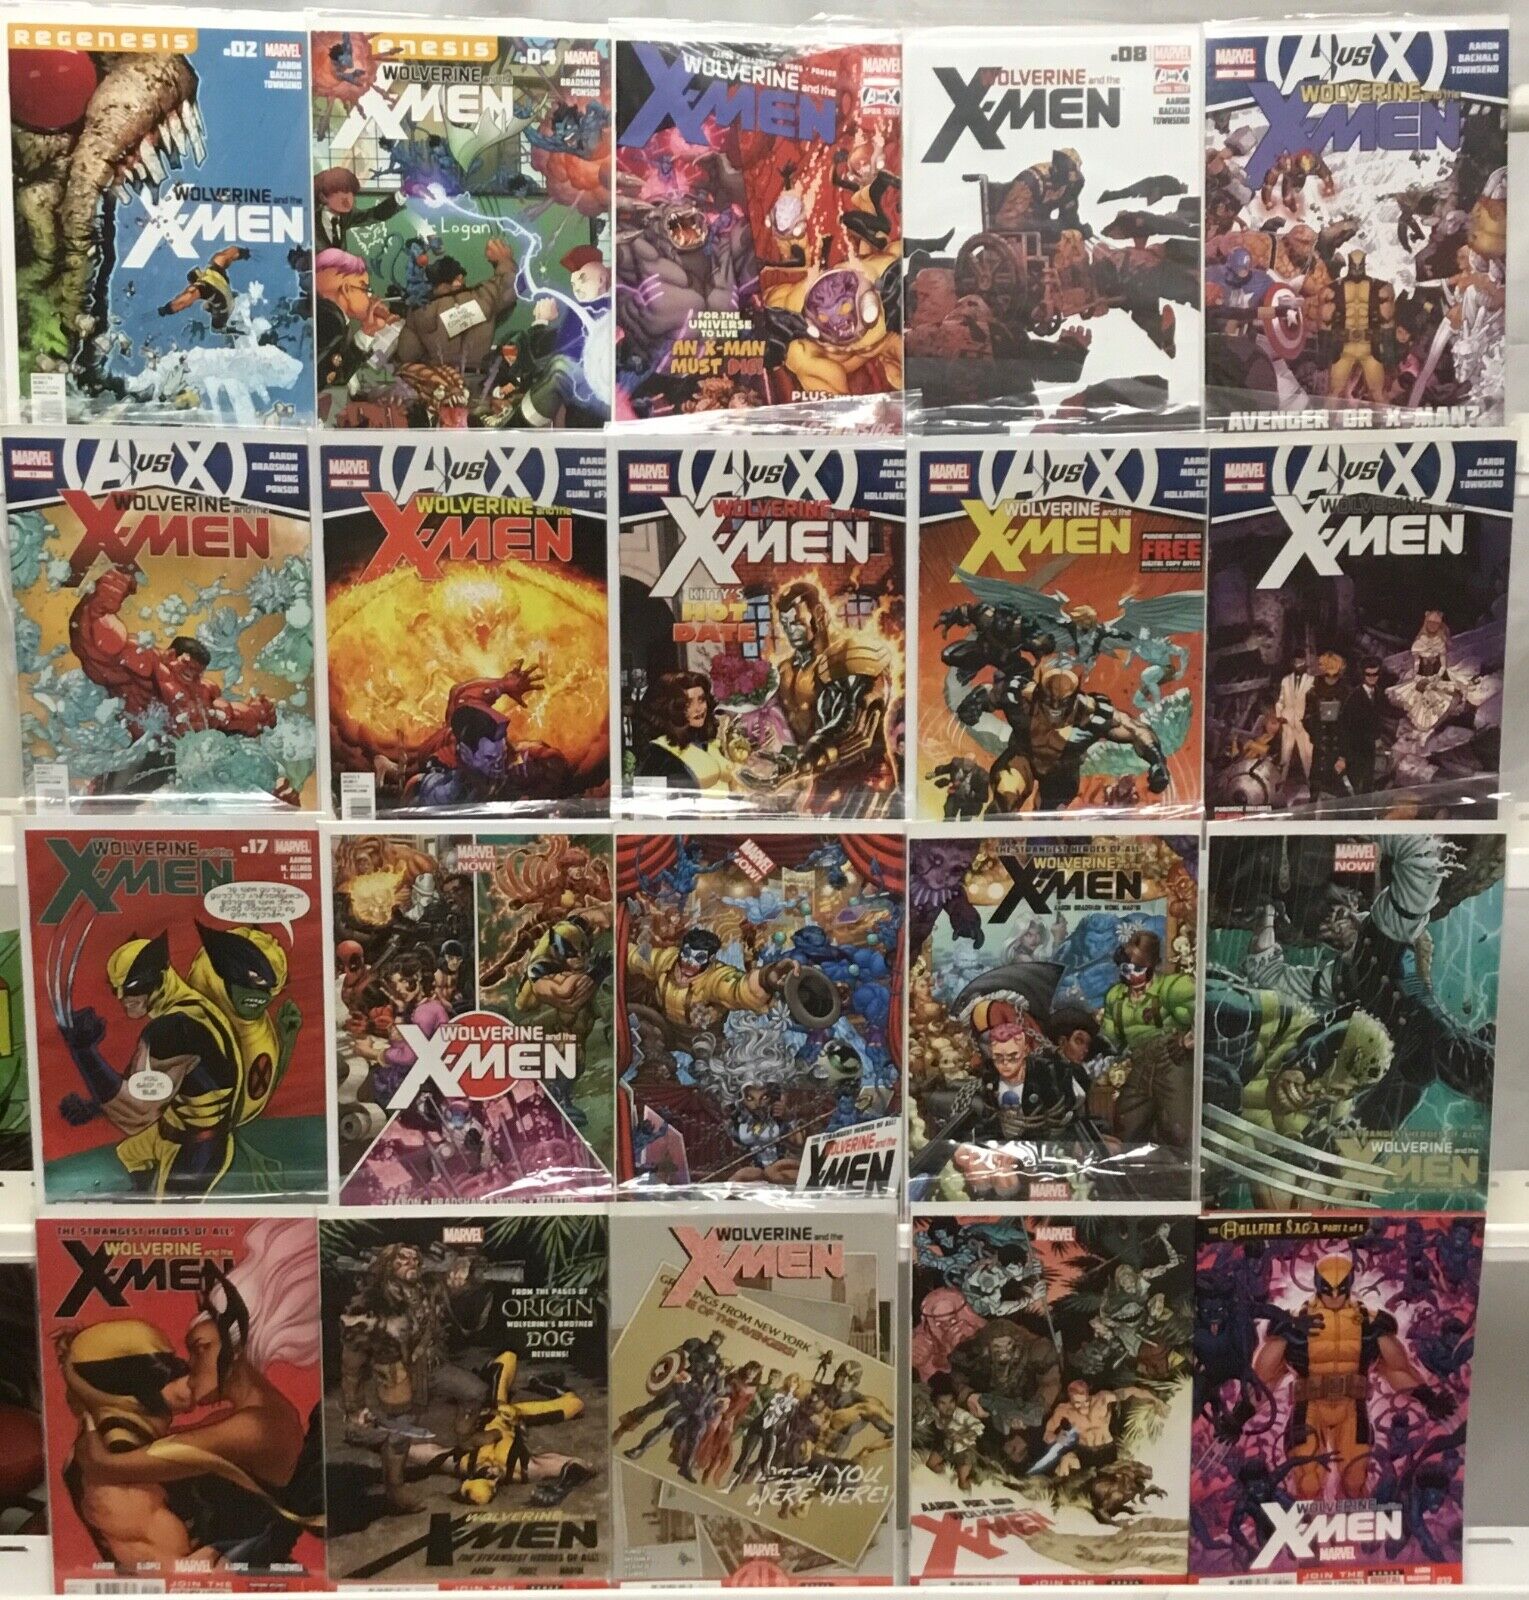 Marvel Comics - Wolverine and the X-Men 1st Series - Comic Book Lot of 20 Issues